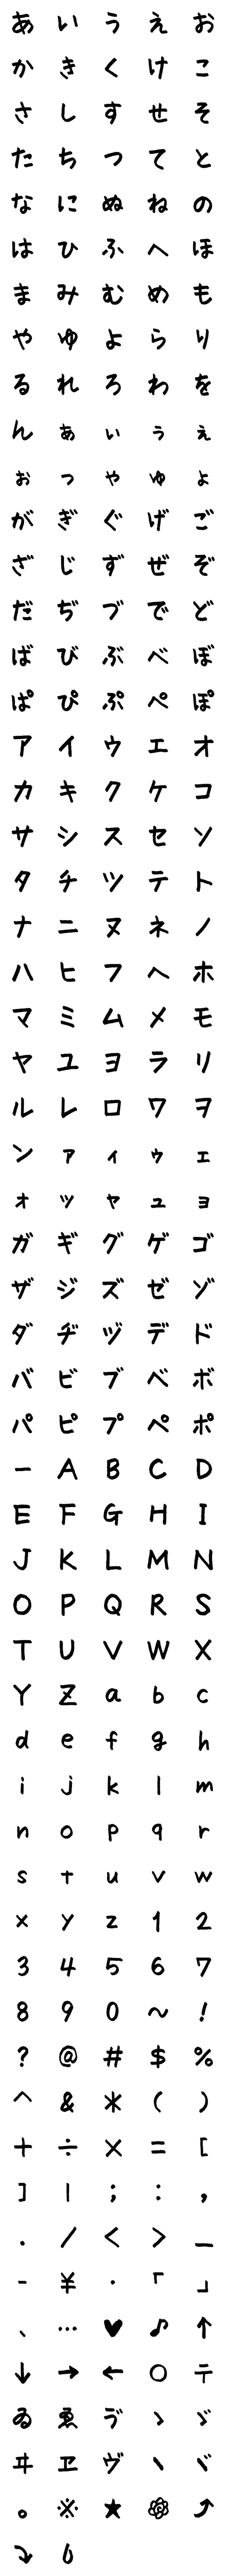 [LINE絵文字]手書き黒ペン字［絵文字］の画像一覧